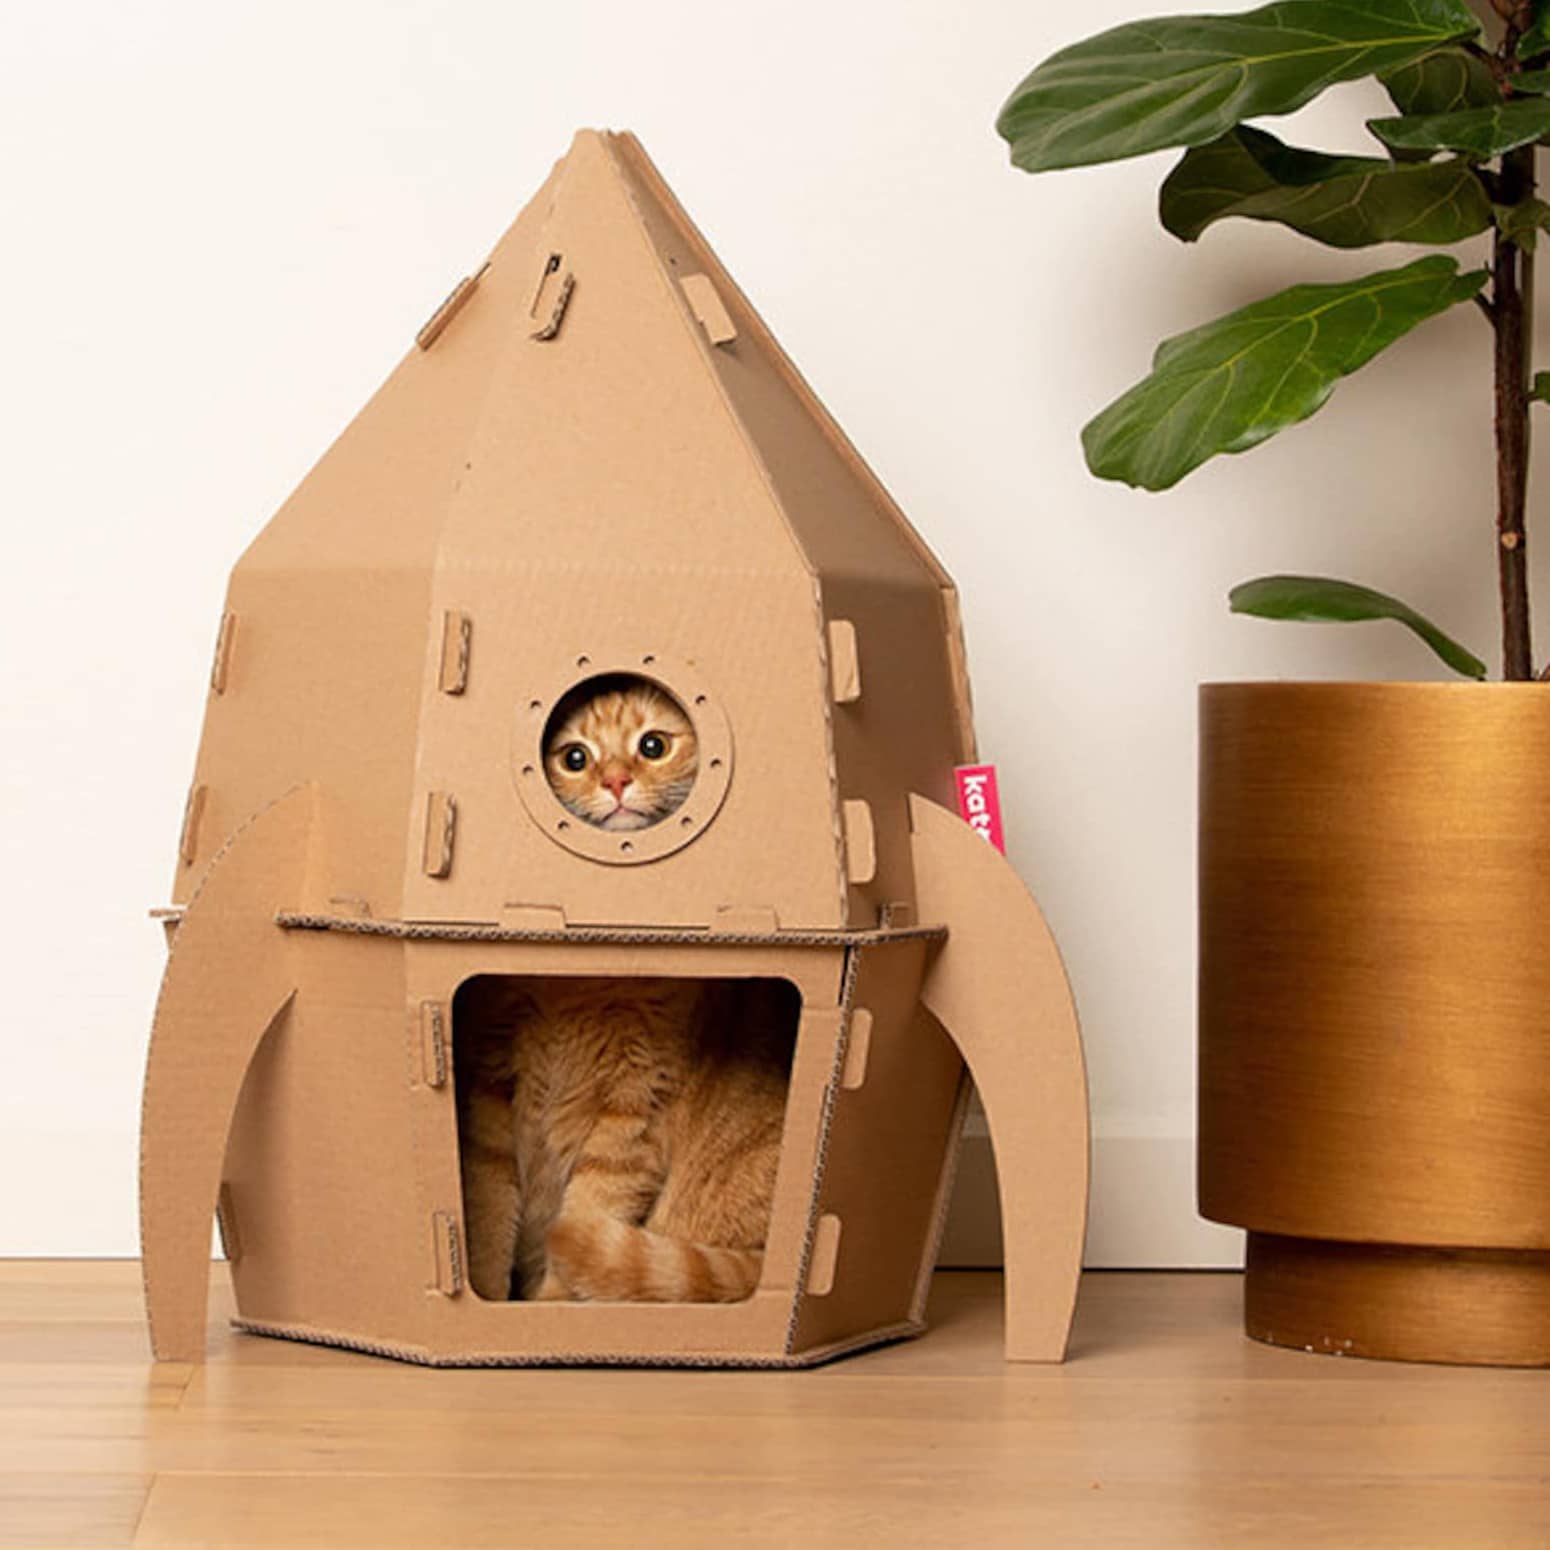 Cardboard Retro Rocket Ship for Space Cats